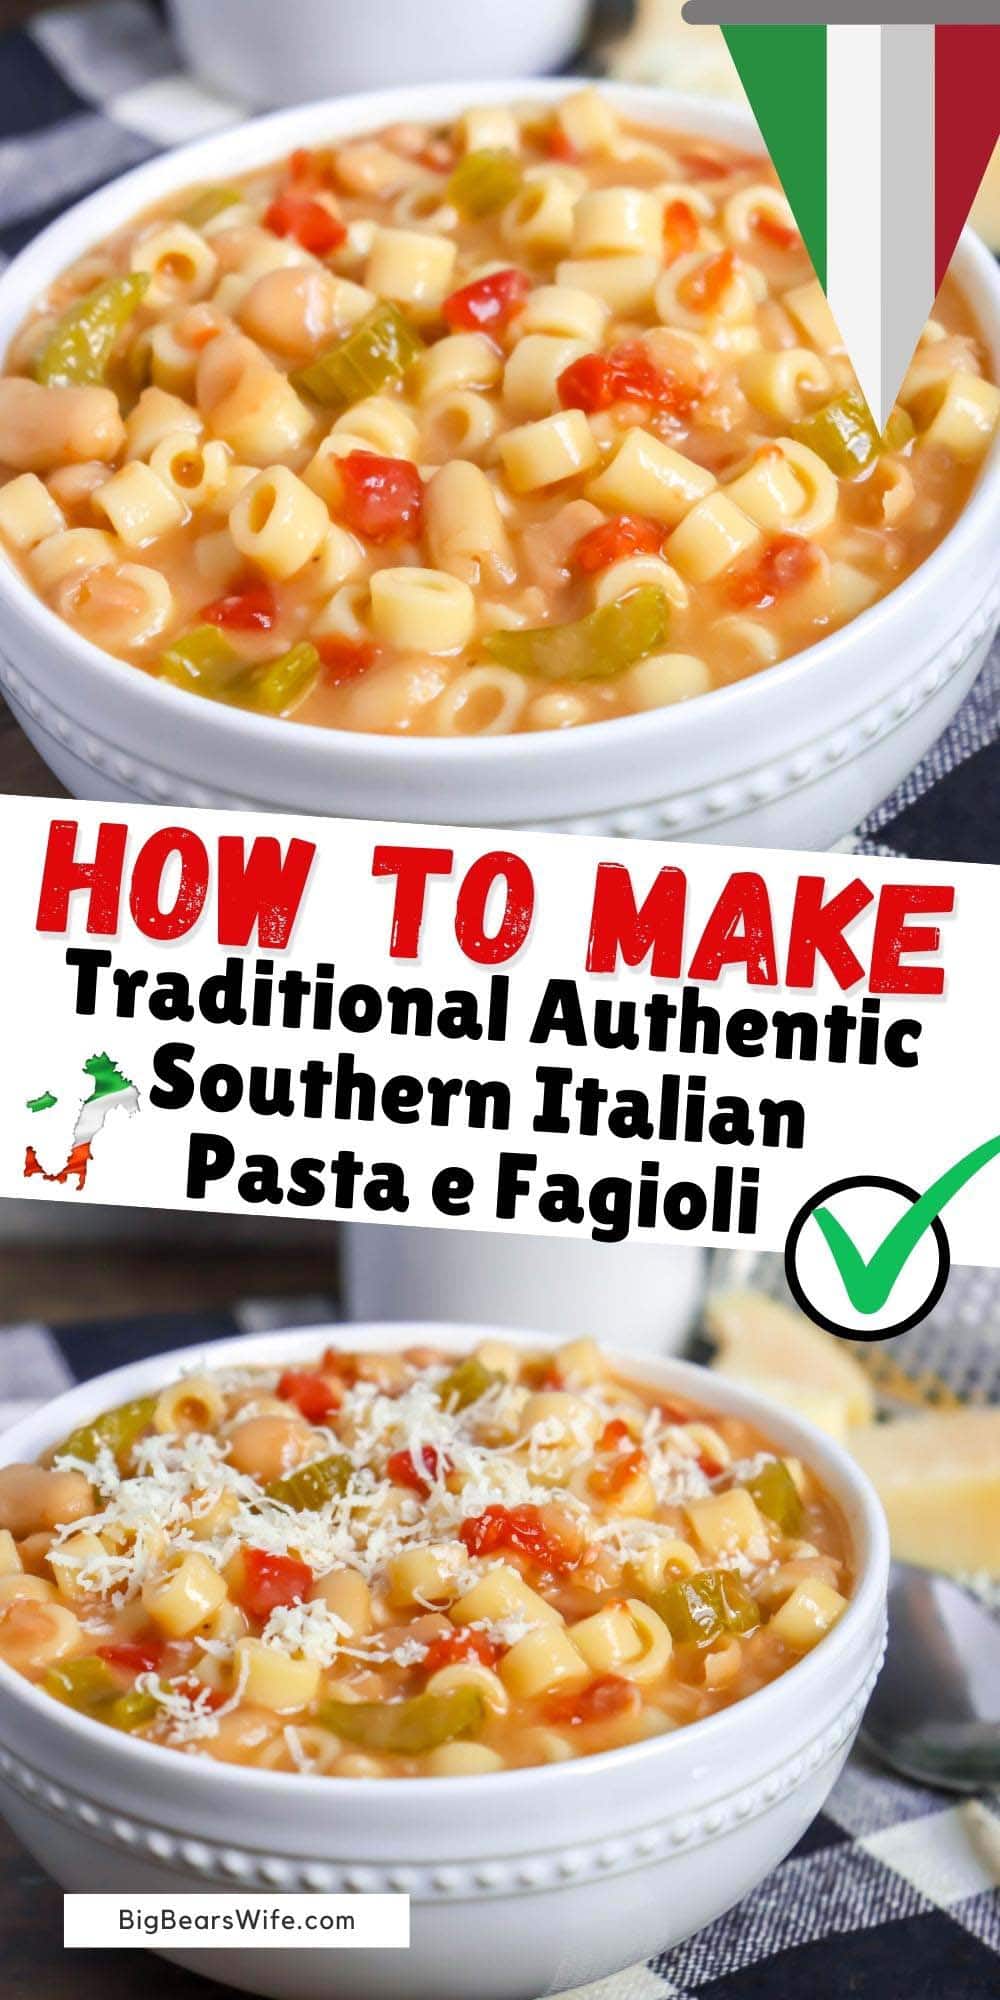 This Southern Italian Pasta e Fagioli Recipe has been passed down through the generations and has always been a family favorite! This is a Traditional Authentic Southern Italian Pasta e Fagioli Recipe made with white beans, celery, diced tomatoes, garlic, and pasta.  via @bigbearswife